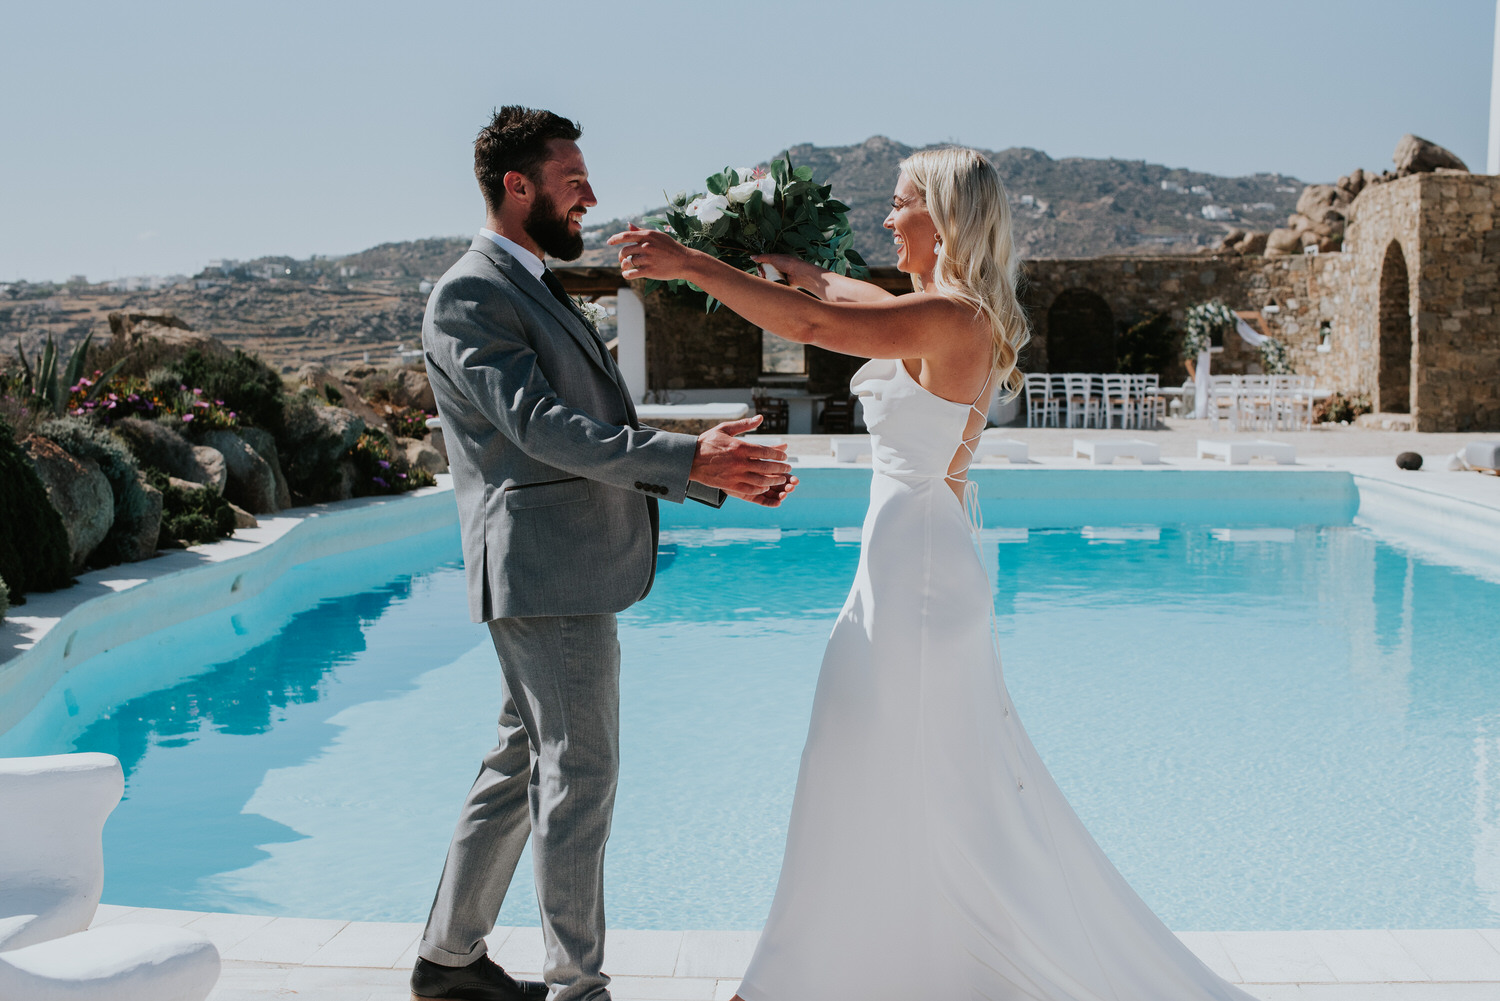 Mykonos wedding photographer: close up of bride and groom going for a hug during first look next to the pool and the rocks in the background.